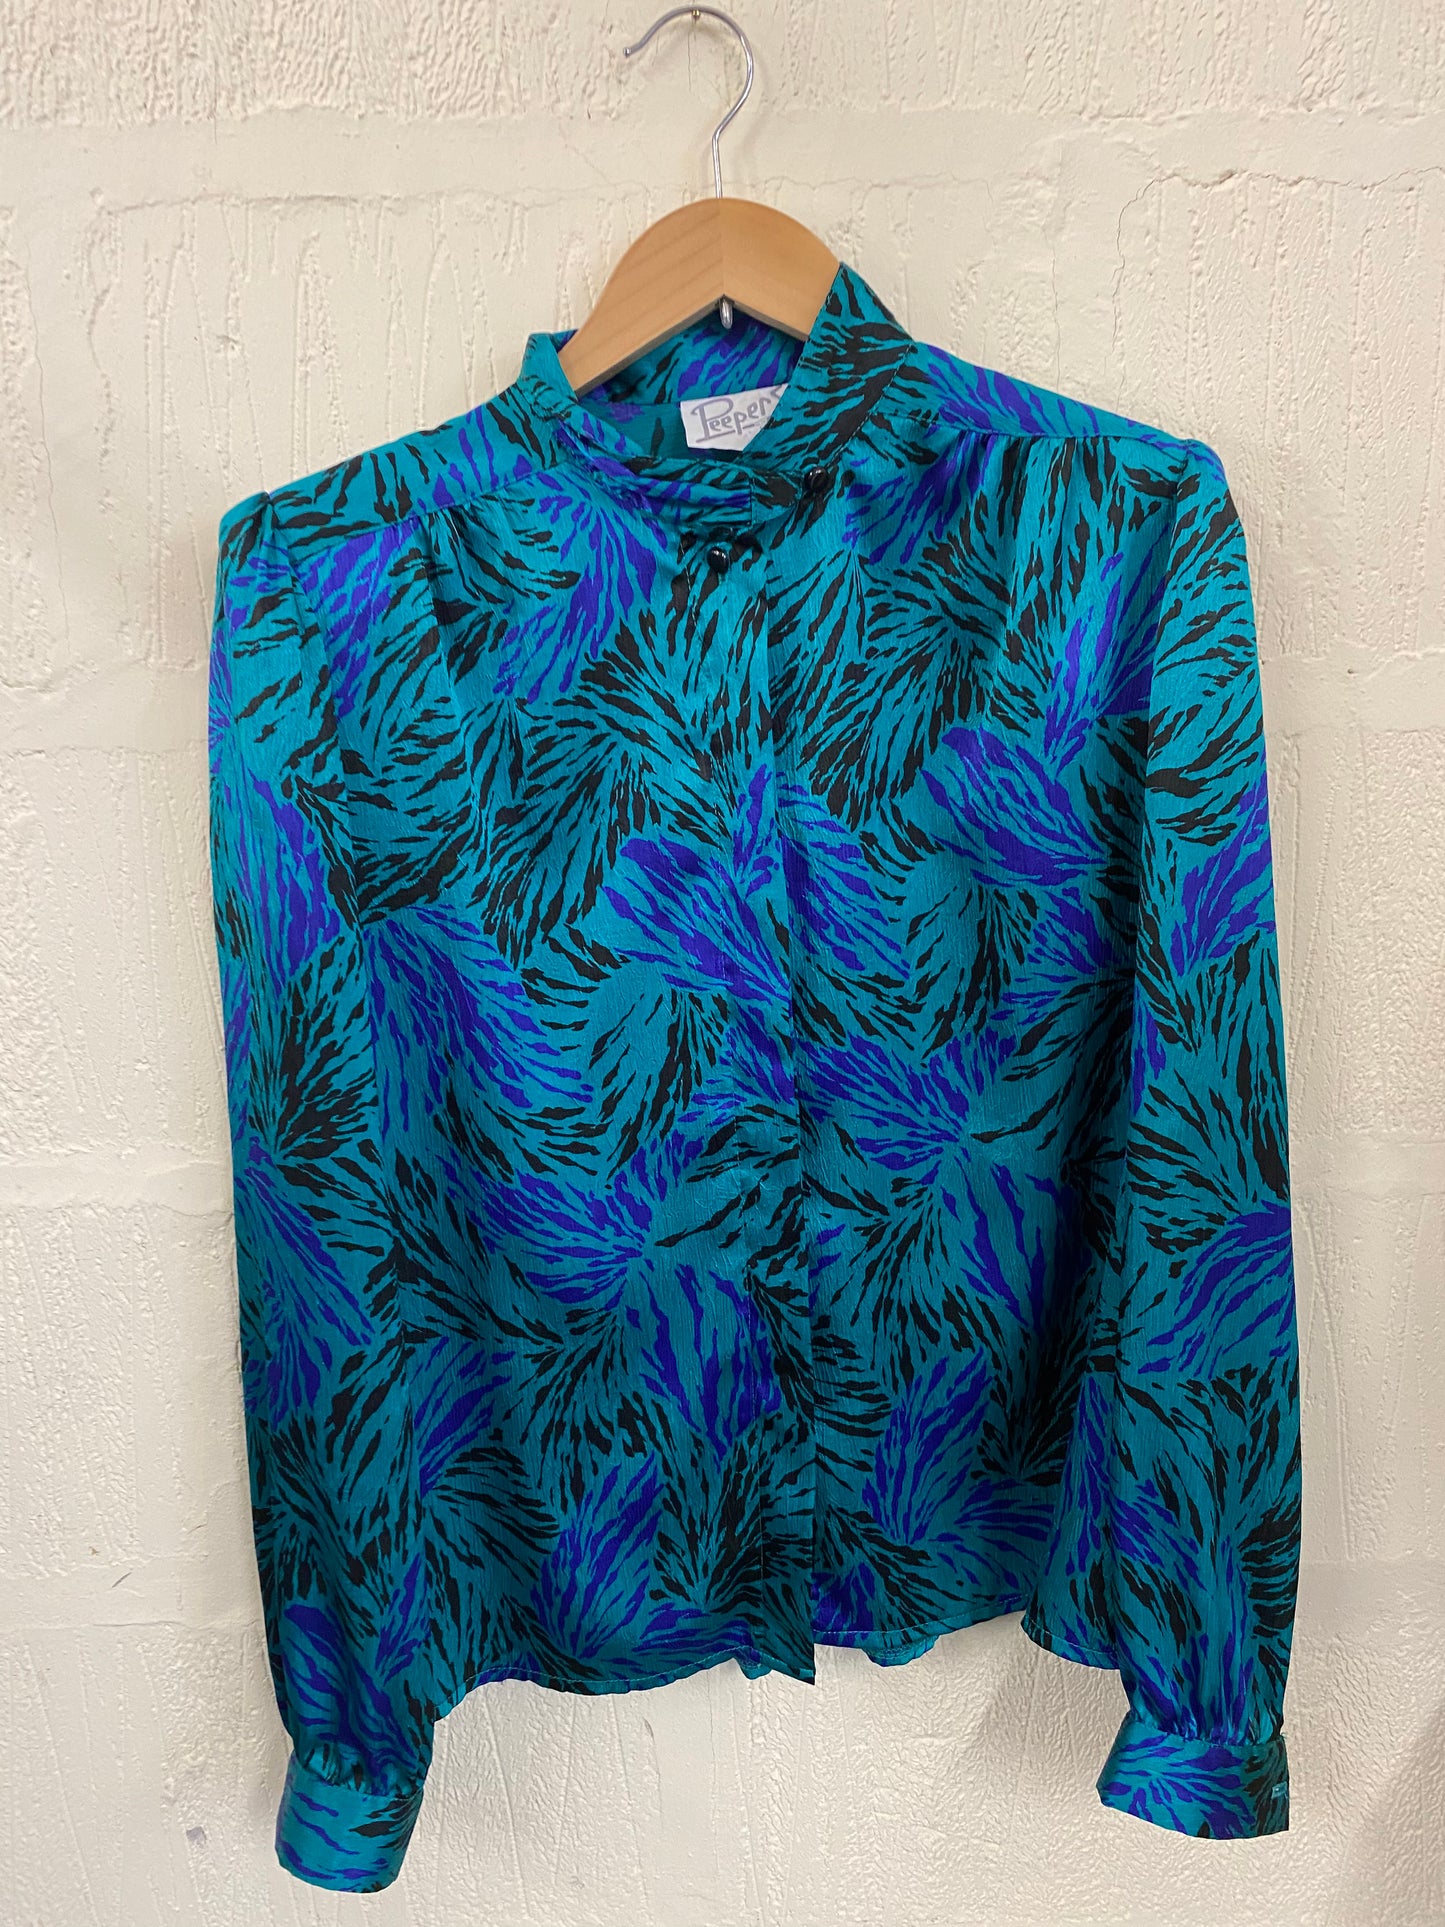 Vintage Teal and Blue 1980s Abstract Blouse Size 16